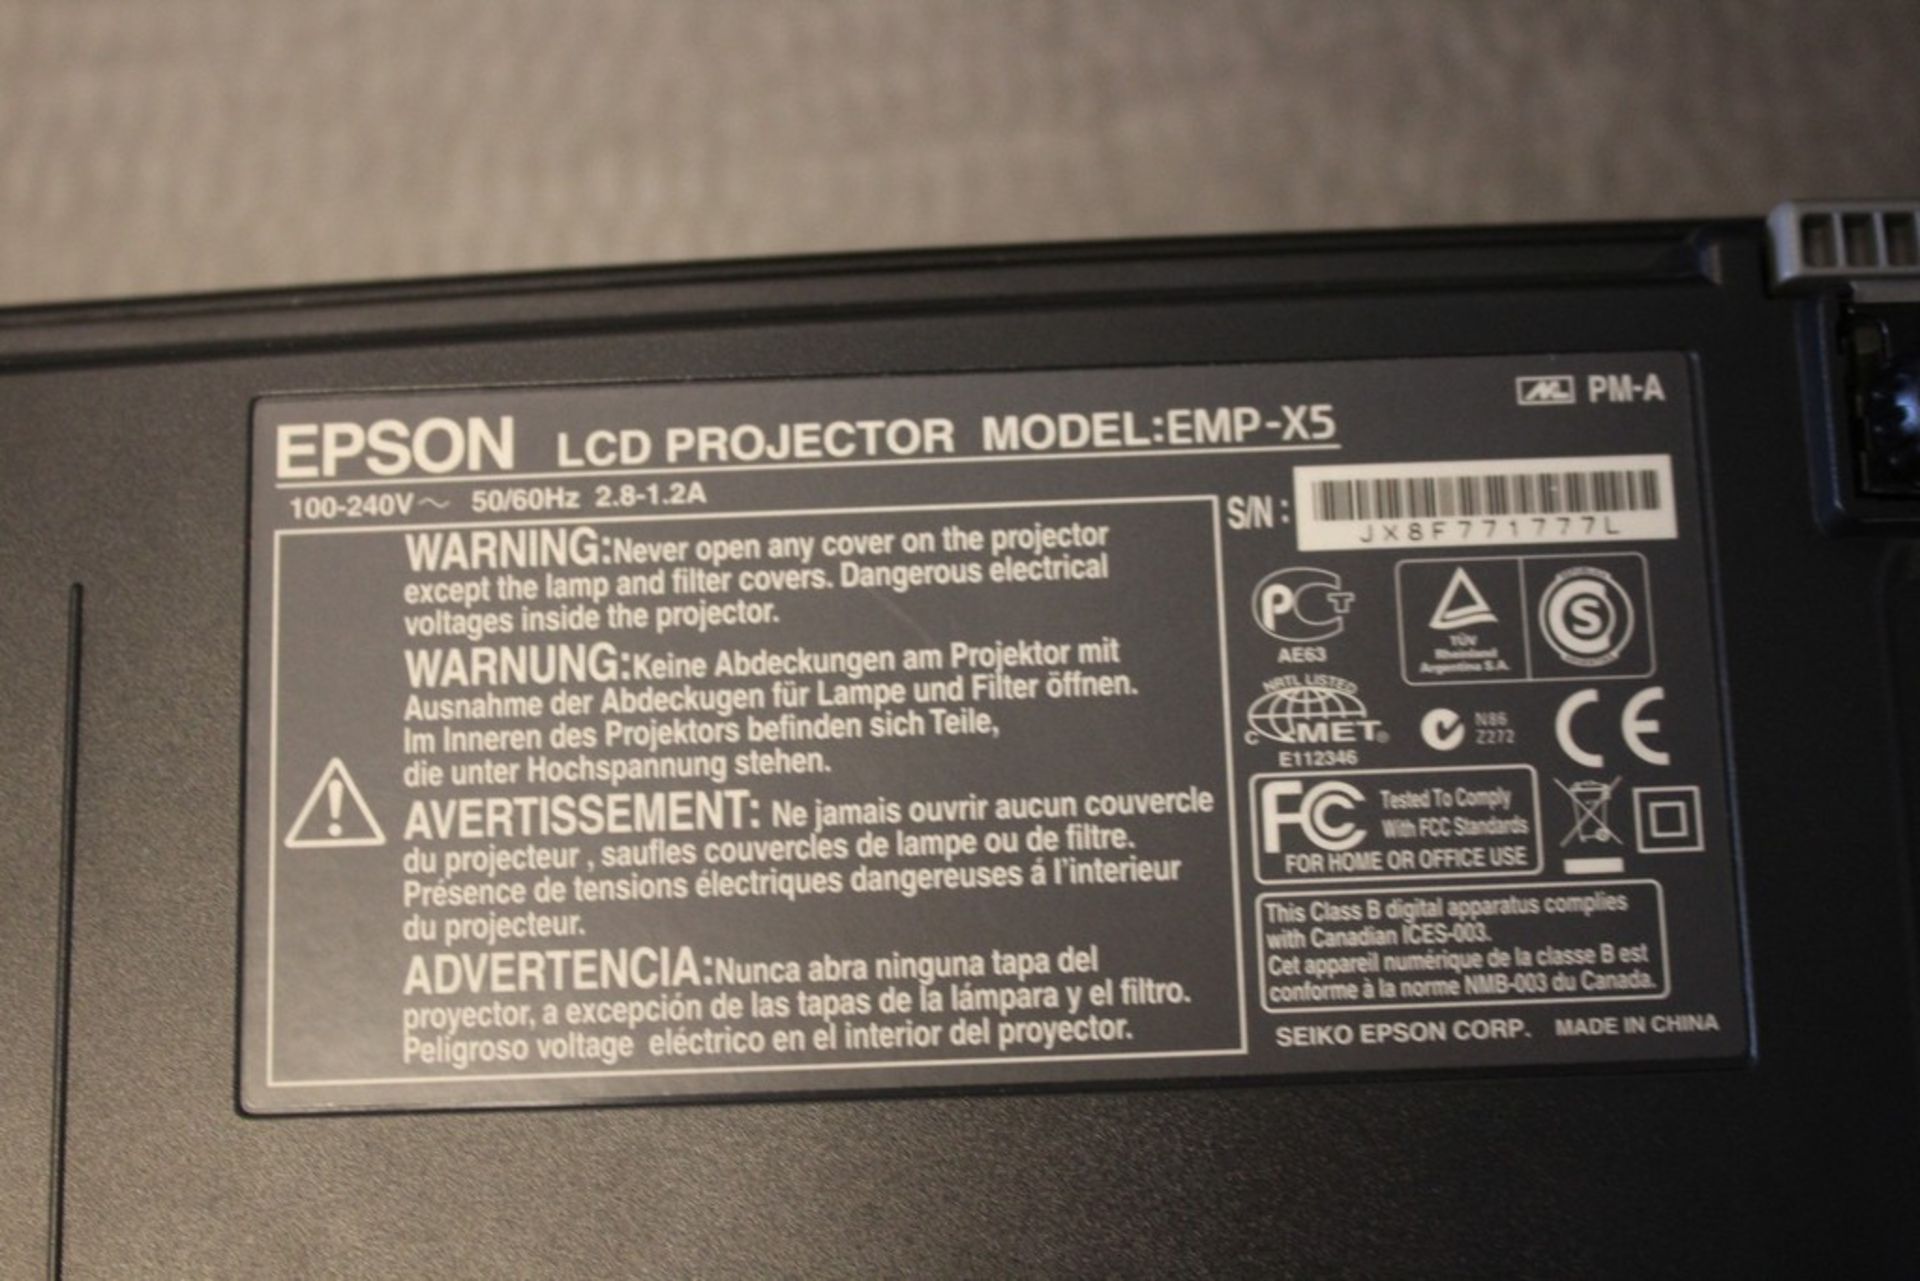 EPSON LCD PROJECTOR, MODEL EMP-X5, POWER LITE 77C - Image 2 of 2